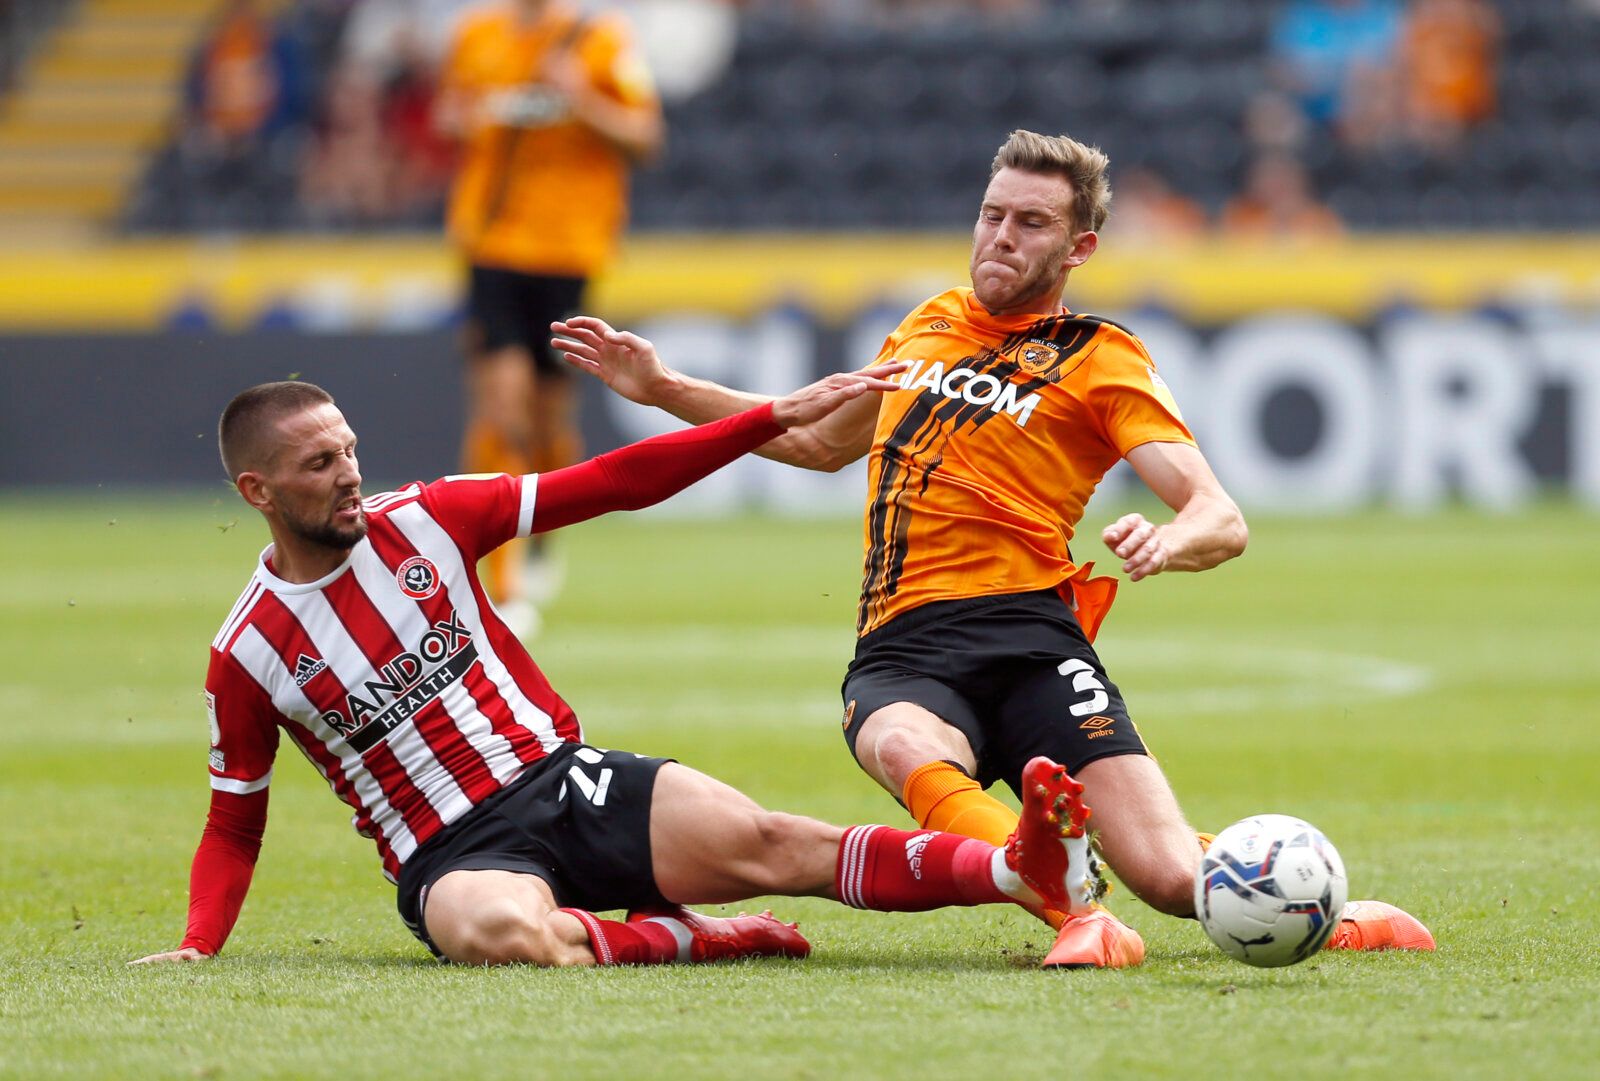 Soccer Football - Championship - Hull City v Sheffield United - KCOM Stadium, Hull, Britain - September 18, 2021 Sheffield United's Connor Hourihane in action with Hull City's Callum Elder Action Images/Ed Sykes EDITORIAL USE ONLY. No use with unauthorized audio, video, data, fixture lists, club/league logos or 'live' services. Online in-match use limited to 75 images, no video emulation. No use in betting, games or single club /league/player publications.  Please contact your account representa